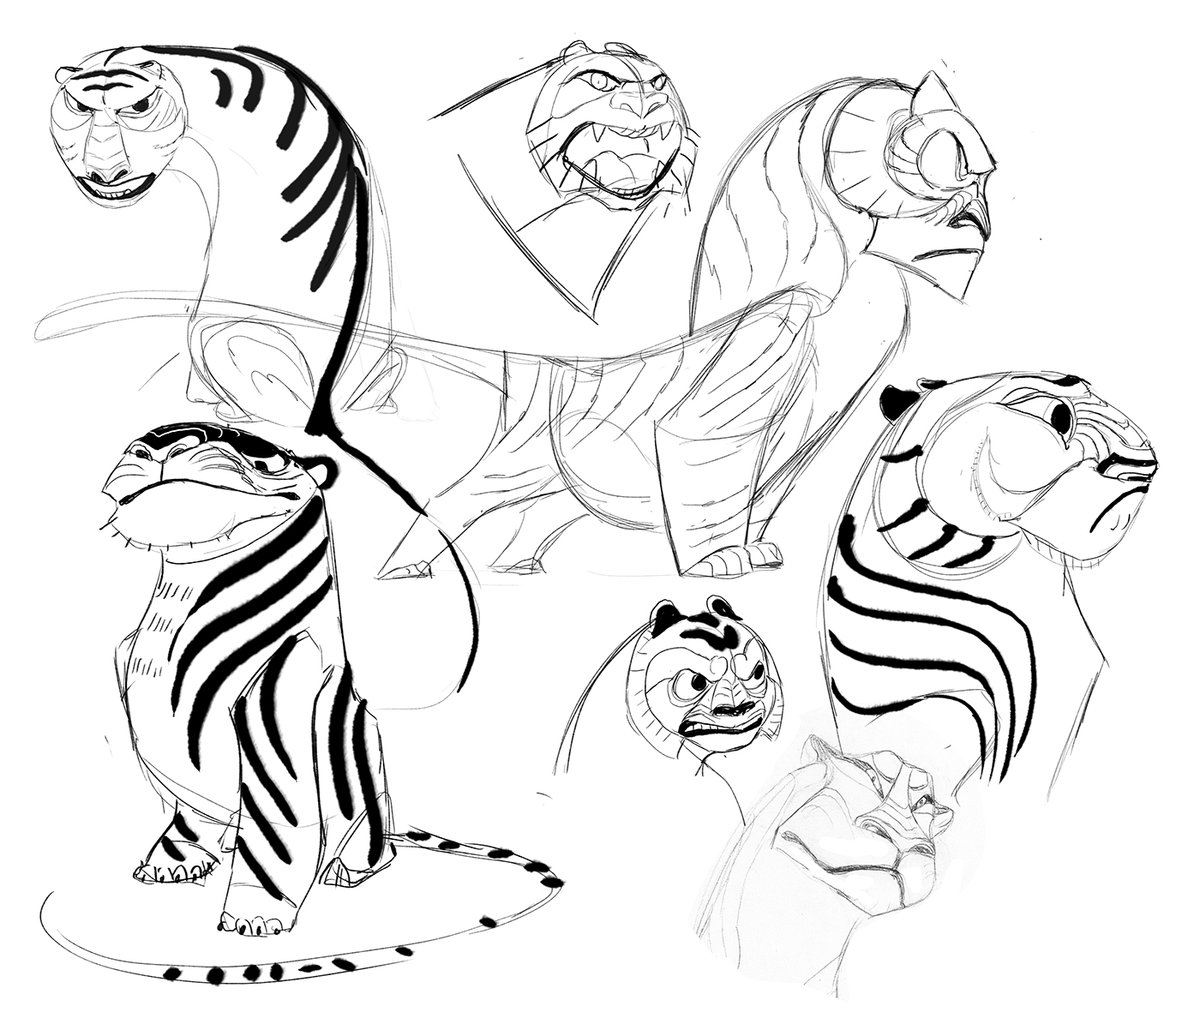 same project, some earlier sketches. Included even those that I think are bad, don't even look like tiger. But that's part of the process, kinda finding out which shapes feel right. 